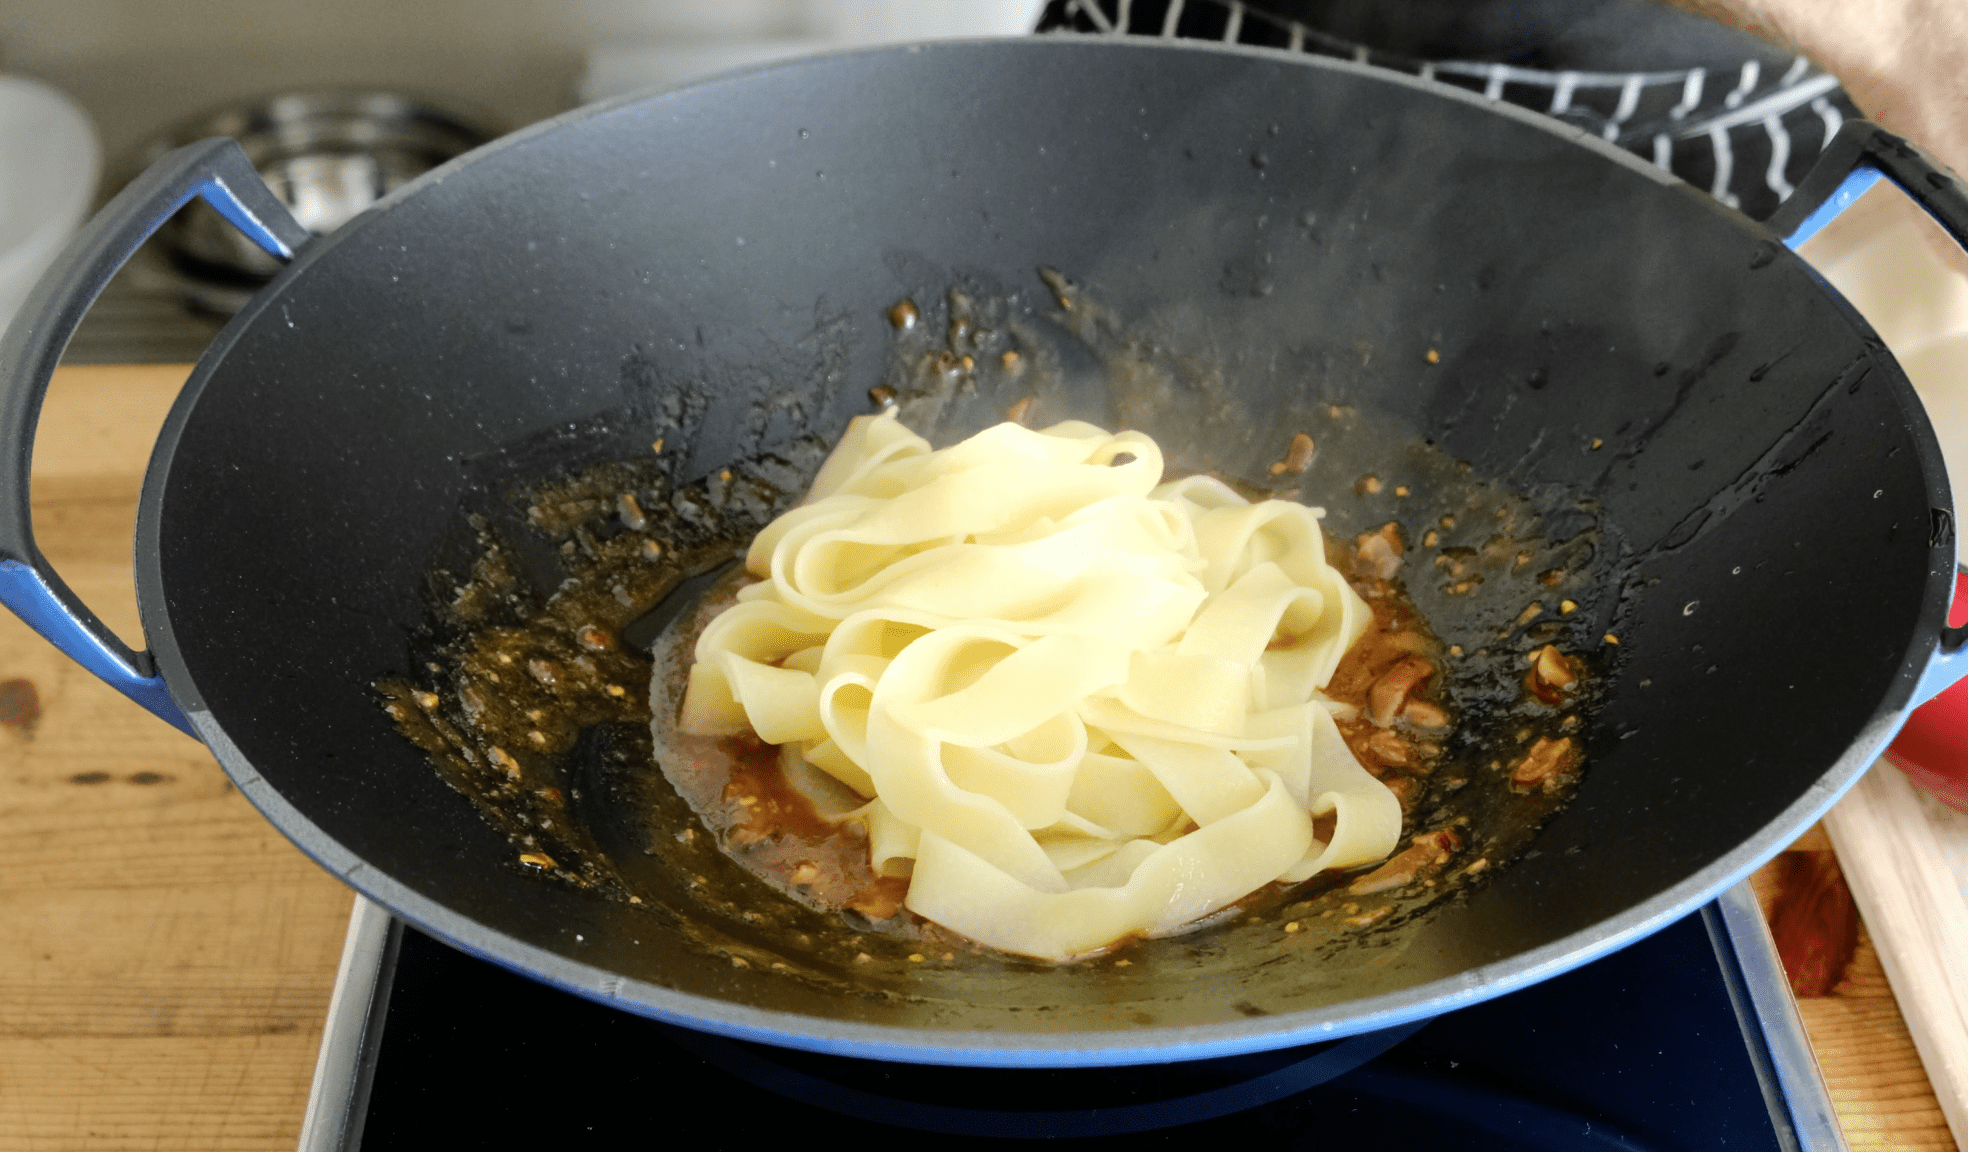 ADDING COOKED PASTA TO SAUCE